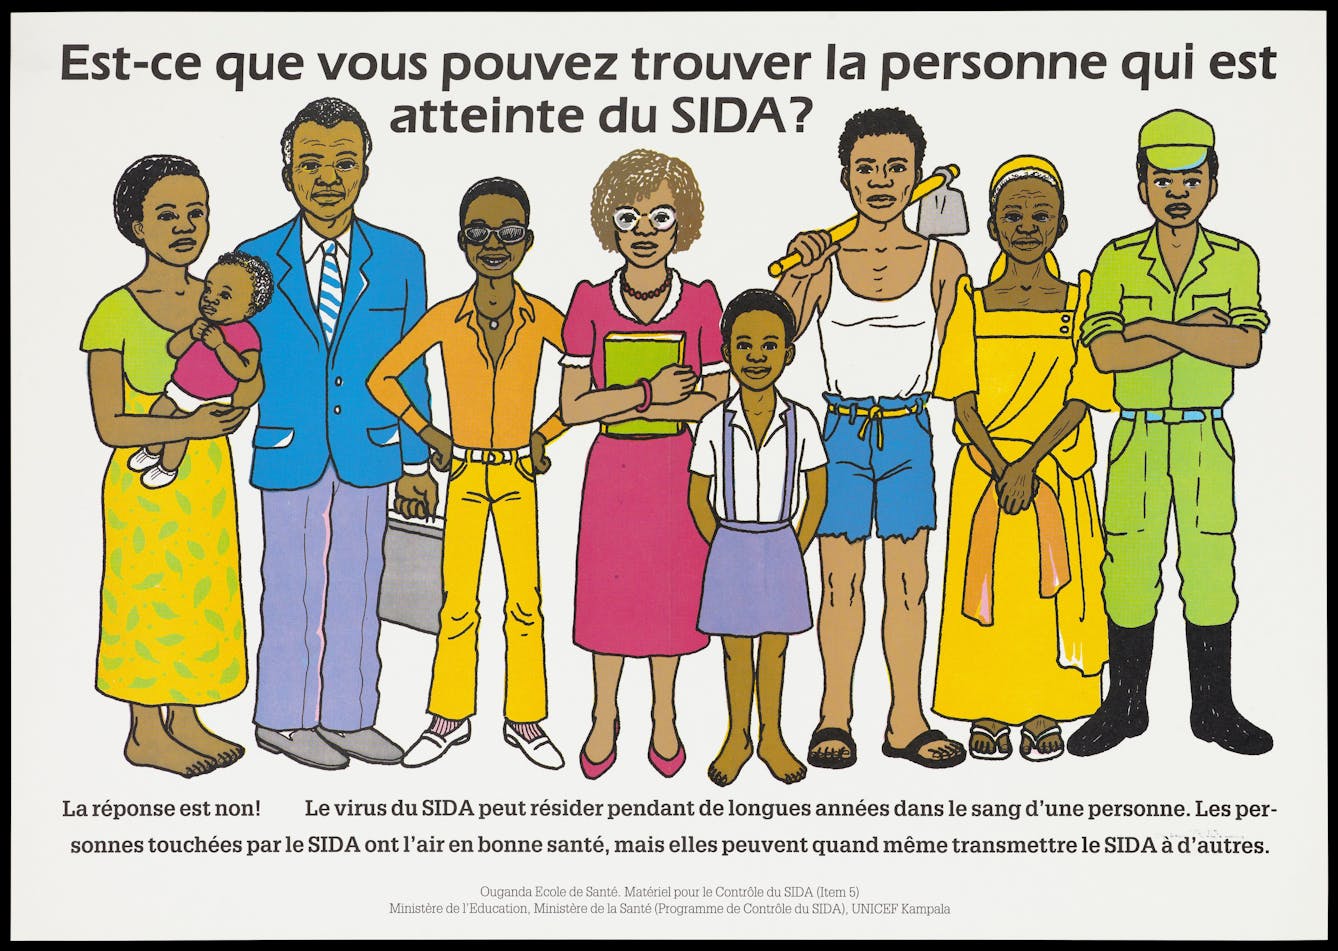 A group of men, women and children representing the difficulty in spotting who carries the HIV virus, with text: "Est-ce que vois pouvez trouver la personne qui est atteinte du SIDA?". Colour lithograph created by UNICEF Uganda, the Uganda Ministry of Education & Uganda Ministry of Health, 1995.